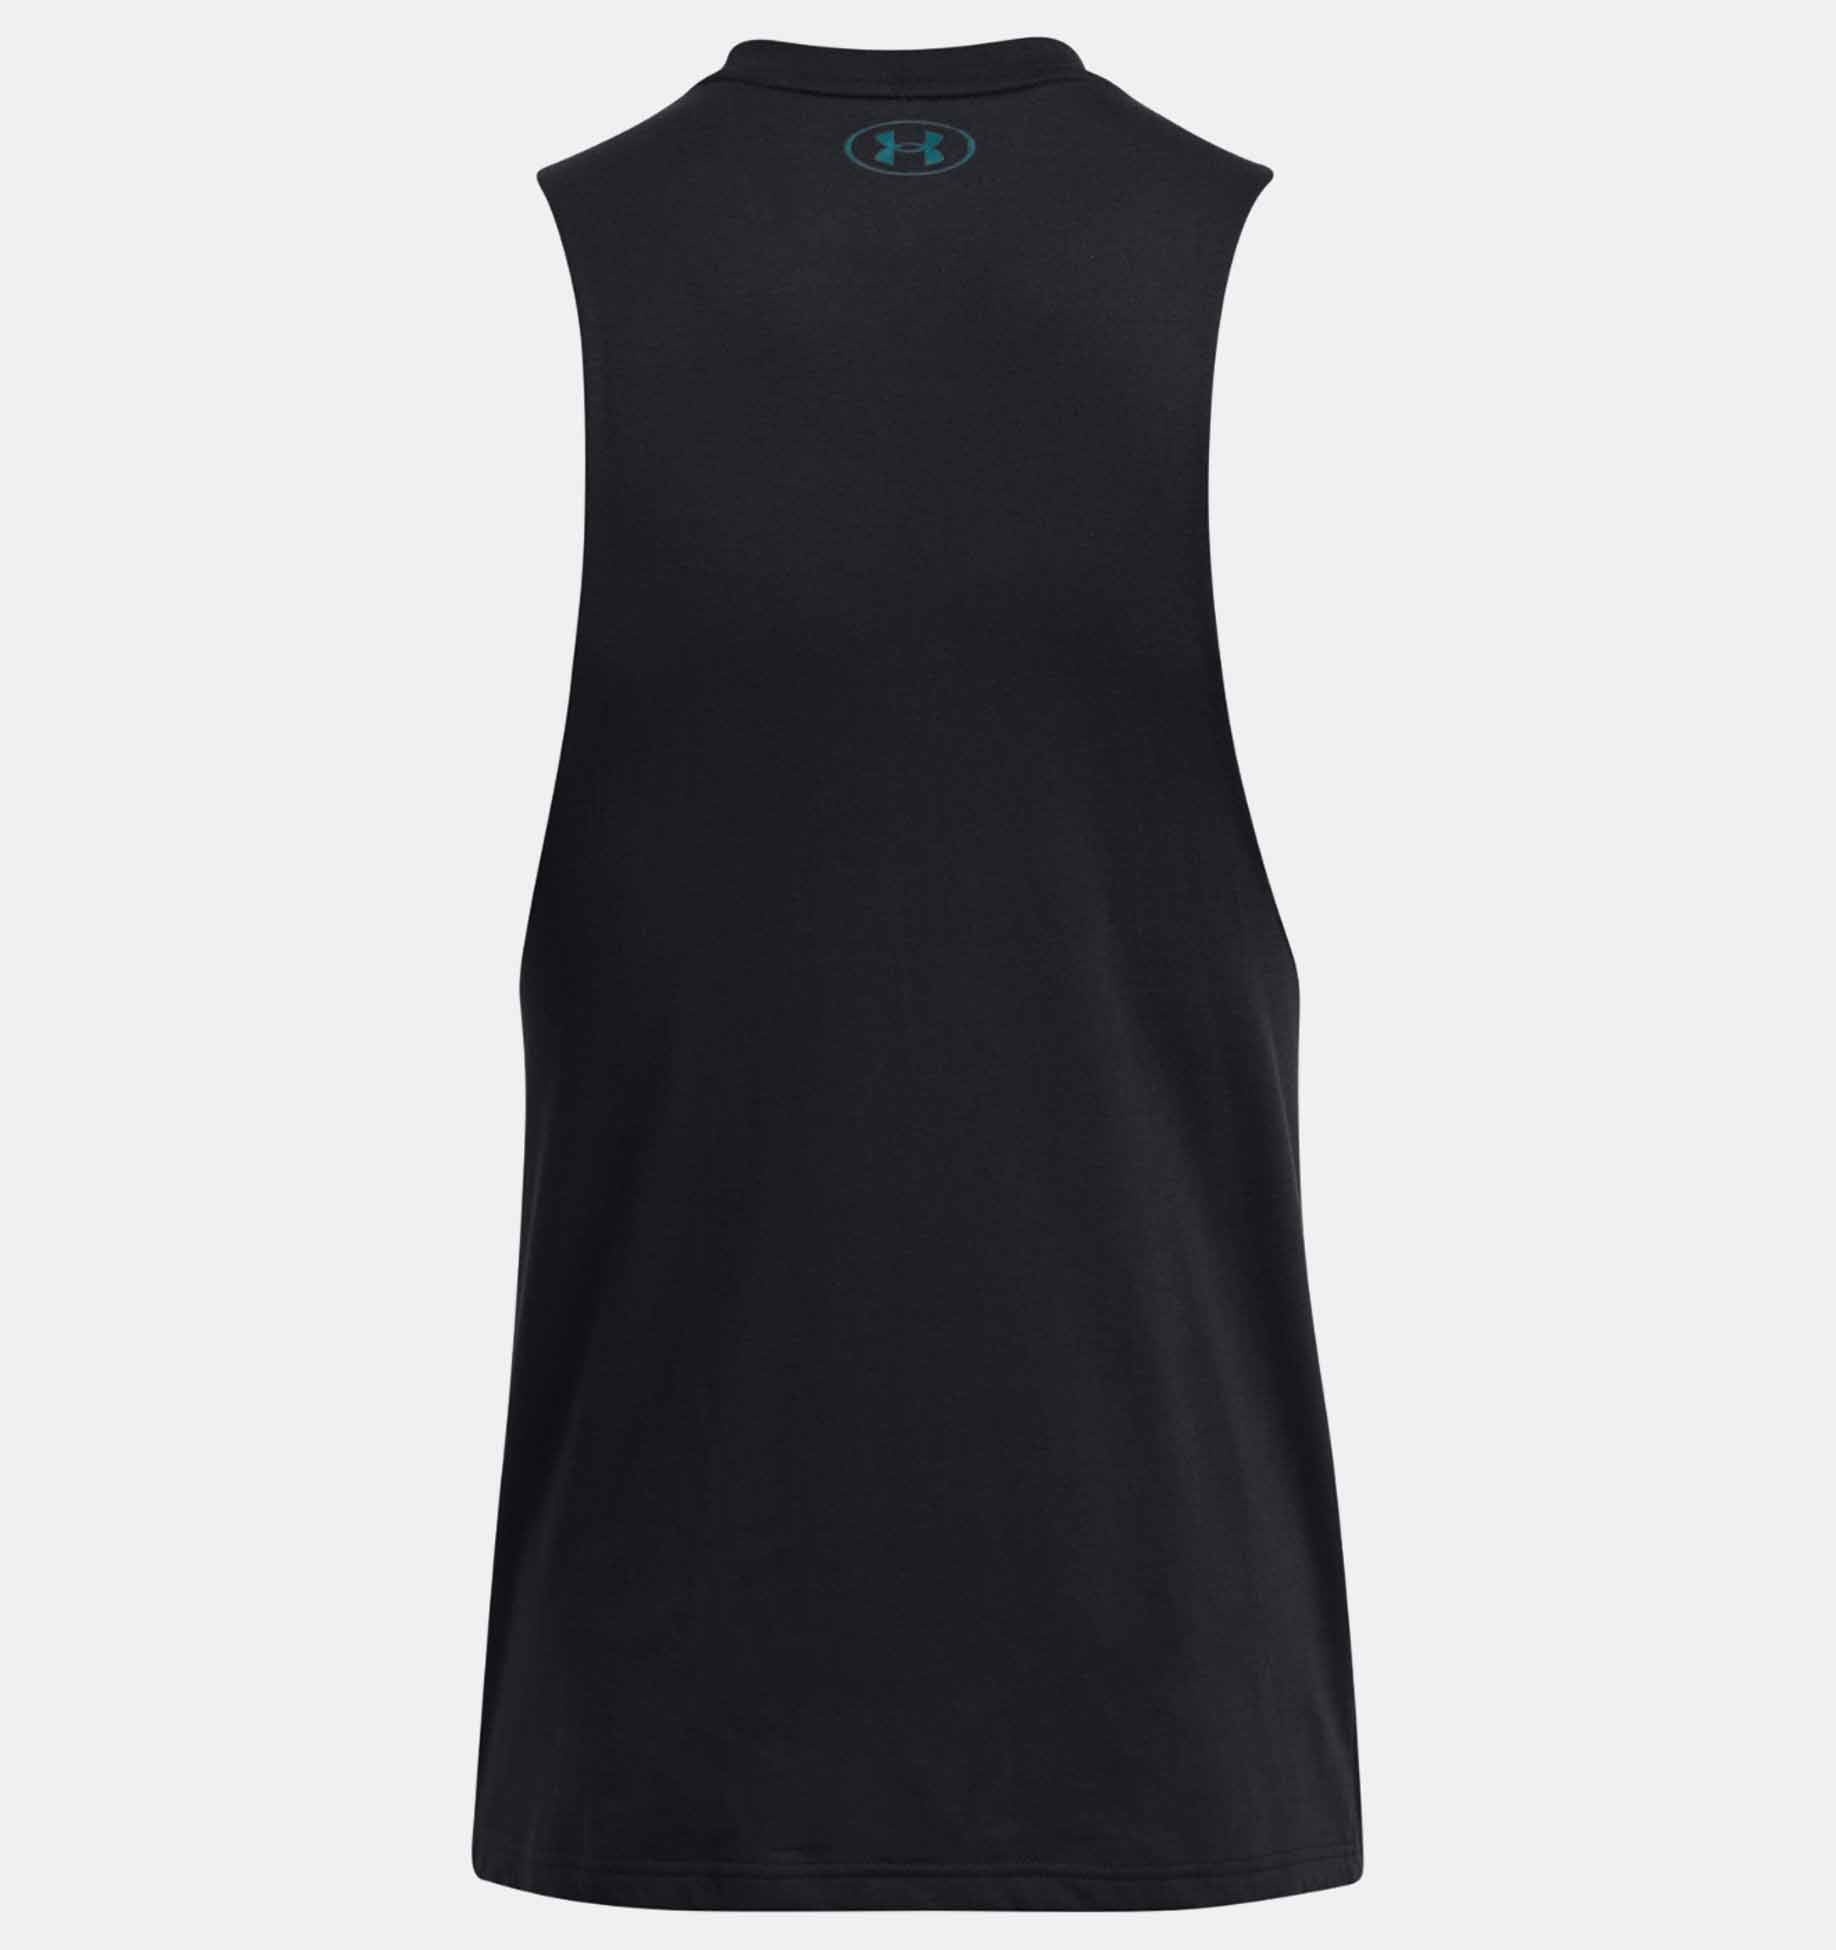 Project Rock BSR Payoff Tanktop